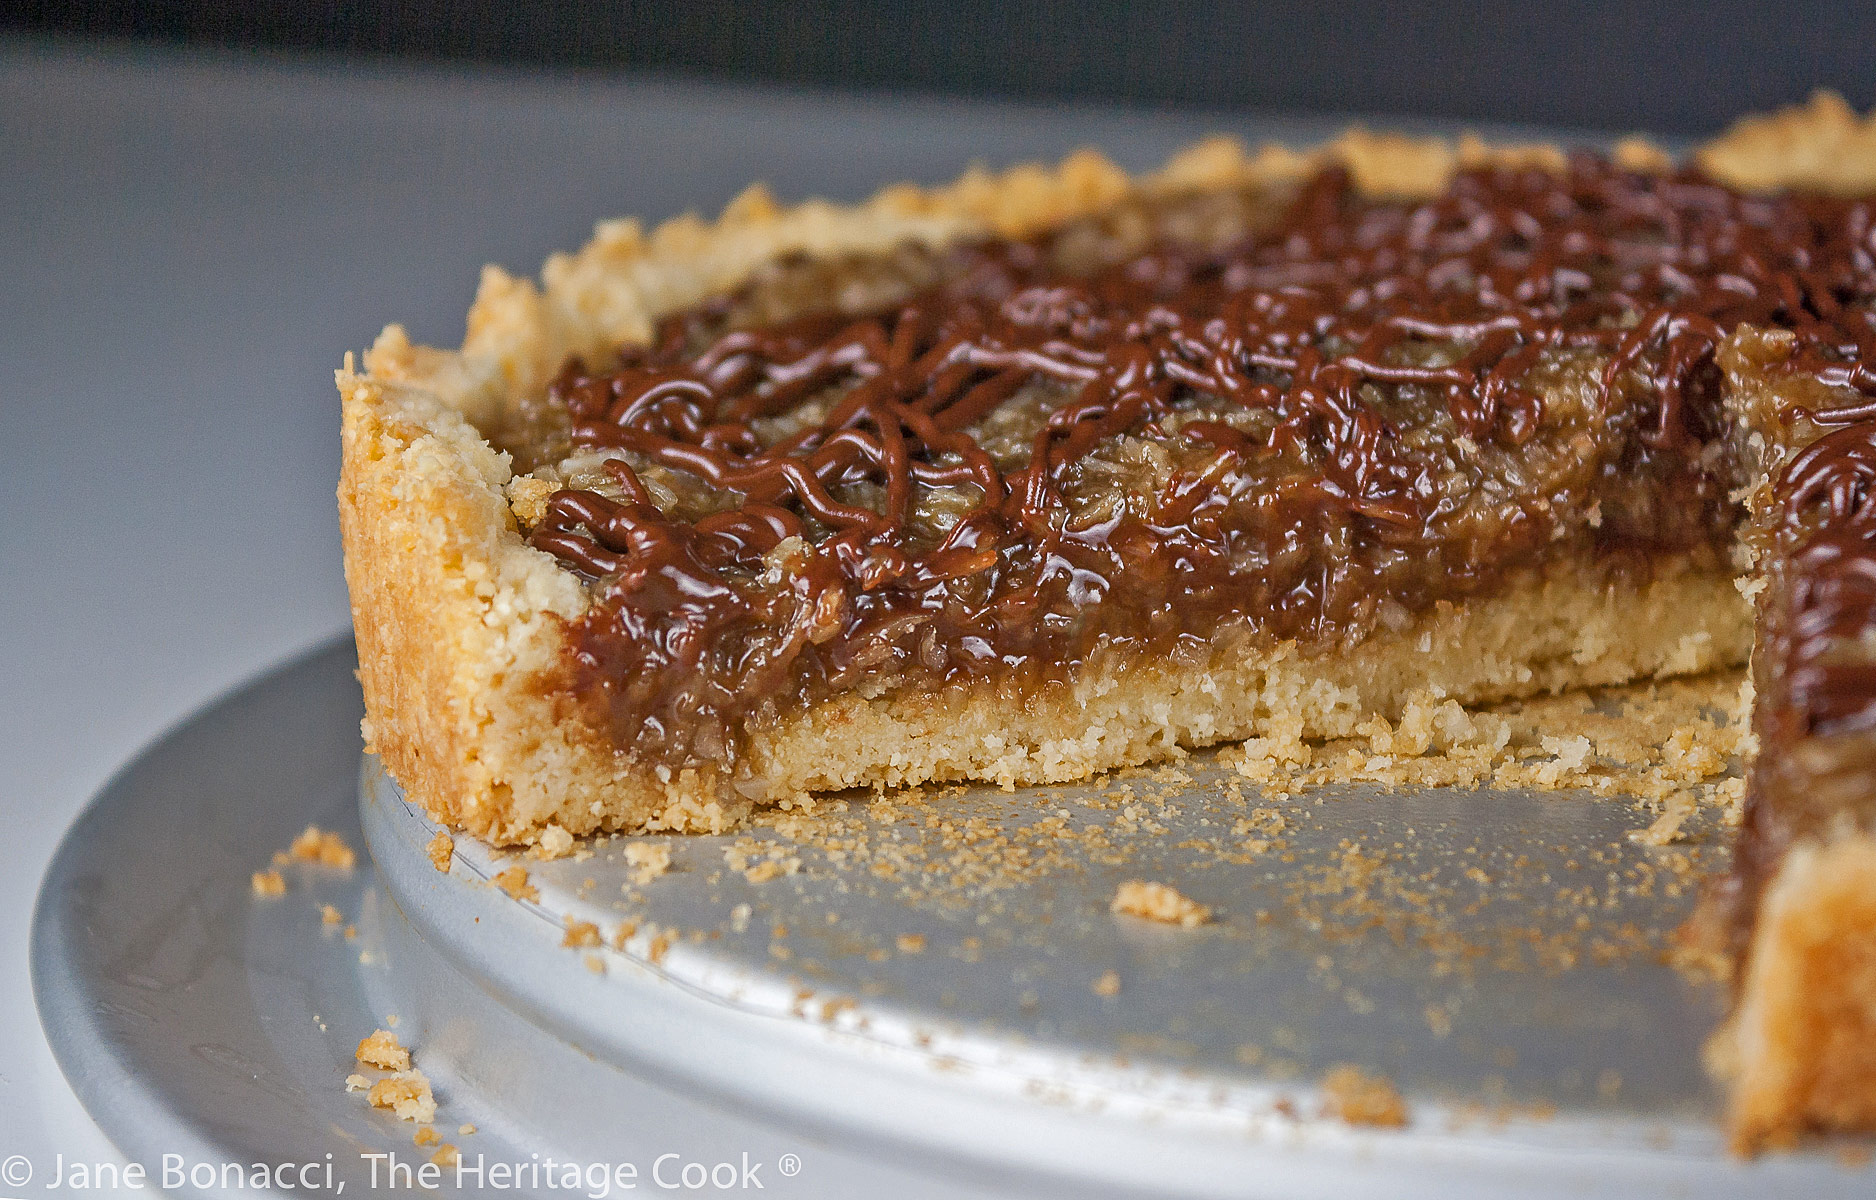 Coconut Caramel Cookie Tart that tastes like a Samoa Girl Scout Cookie; beautiful wedge of the tart drizzled with chocolate and ready to dive into © 2023 Jane Bonacci, The Heritage Cook.